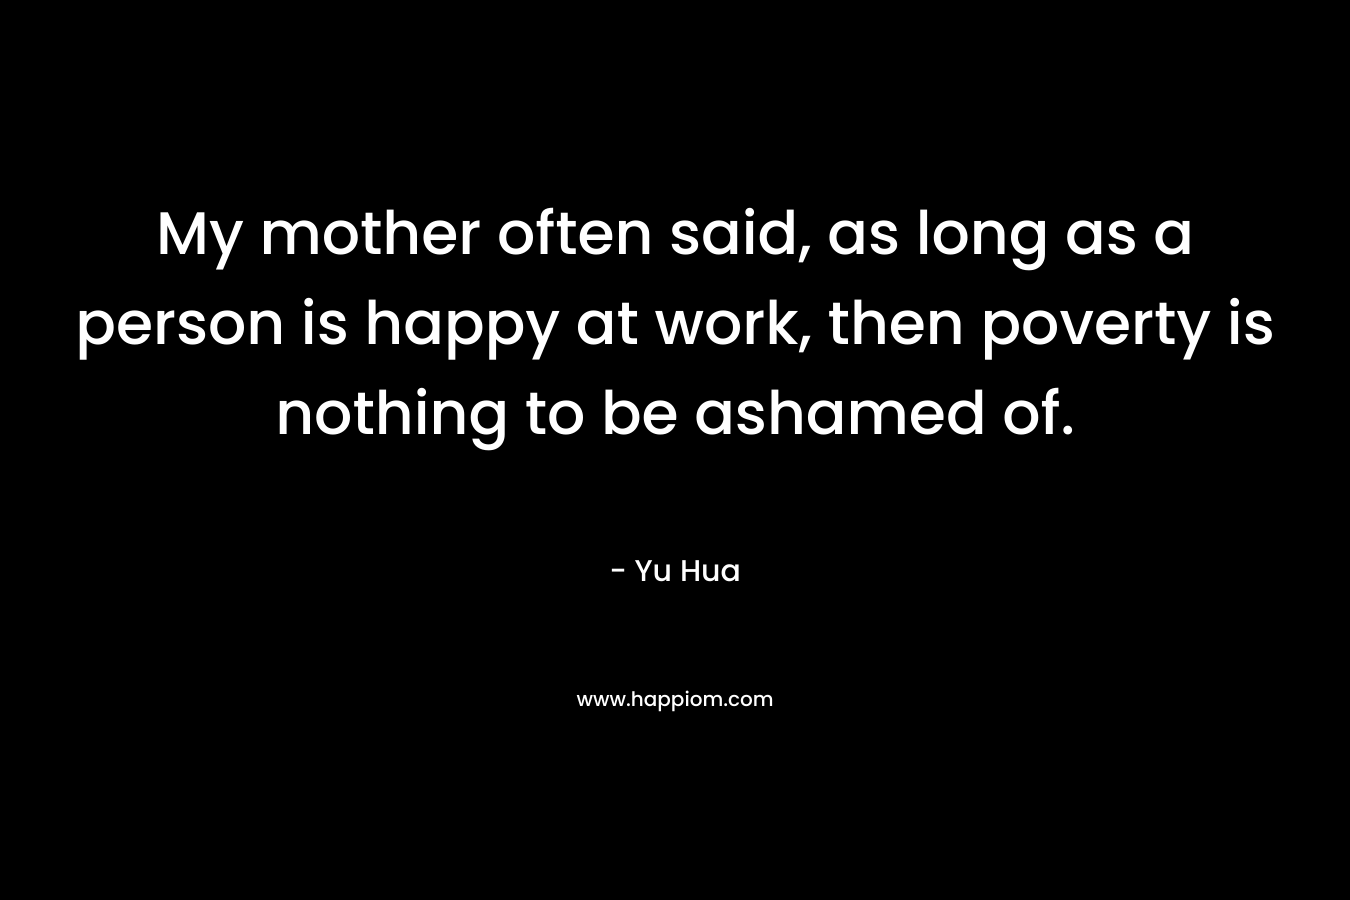 My mother often said, as long as a person is happy at work, then poverty is nothing to be ashamed of. – Yu Hua